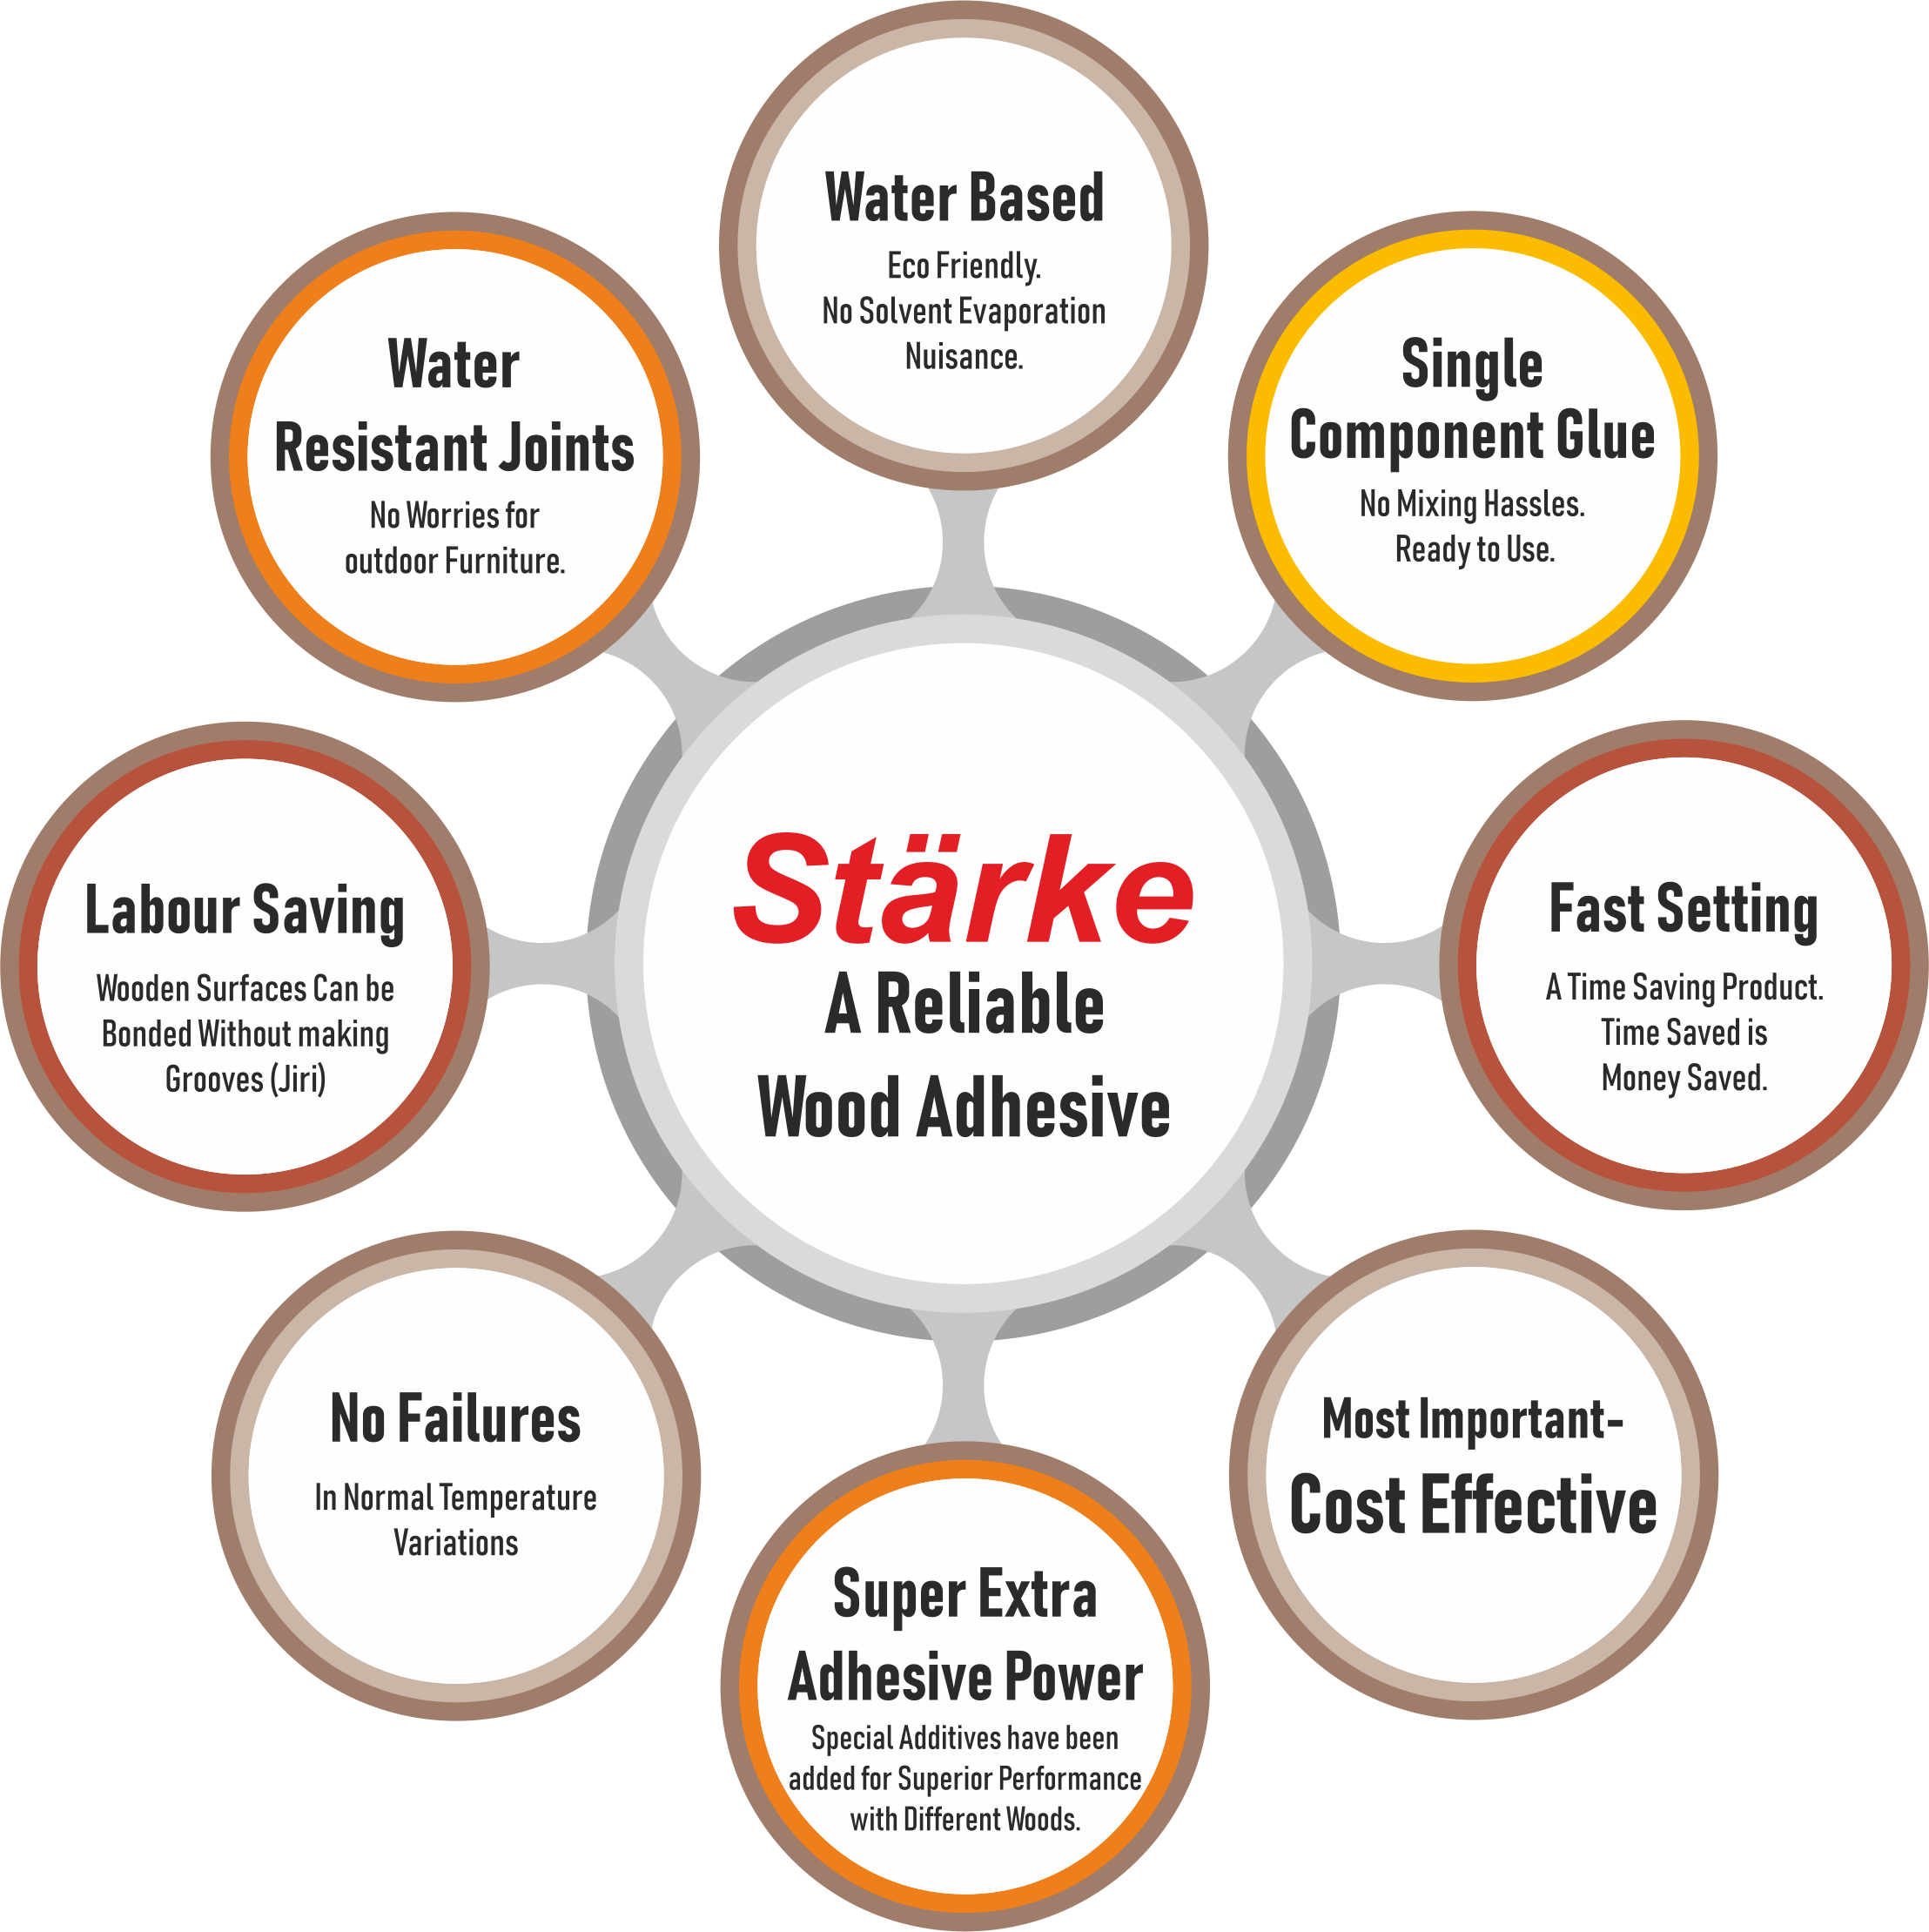 why_starke_adhesive, why_we, relieable_wood_adhesive, labour_seving, water_based, water_resist_joints